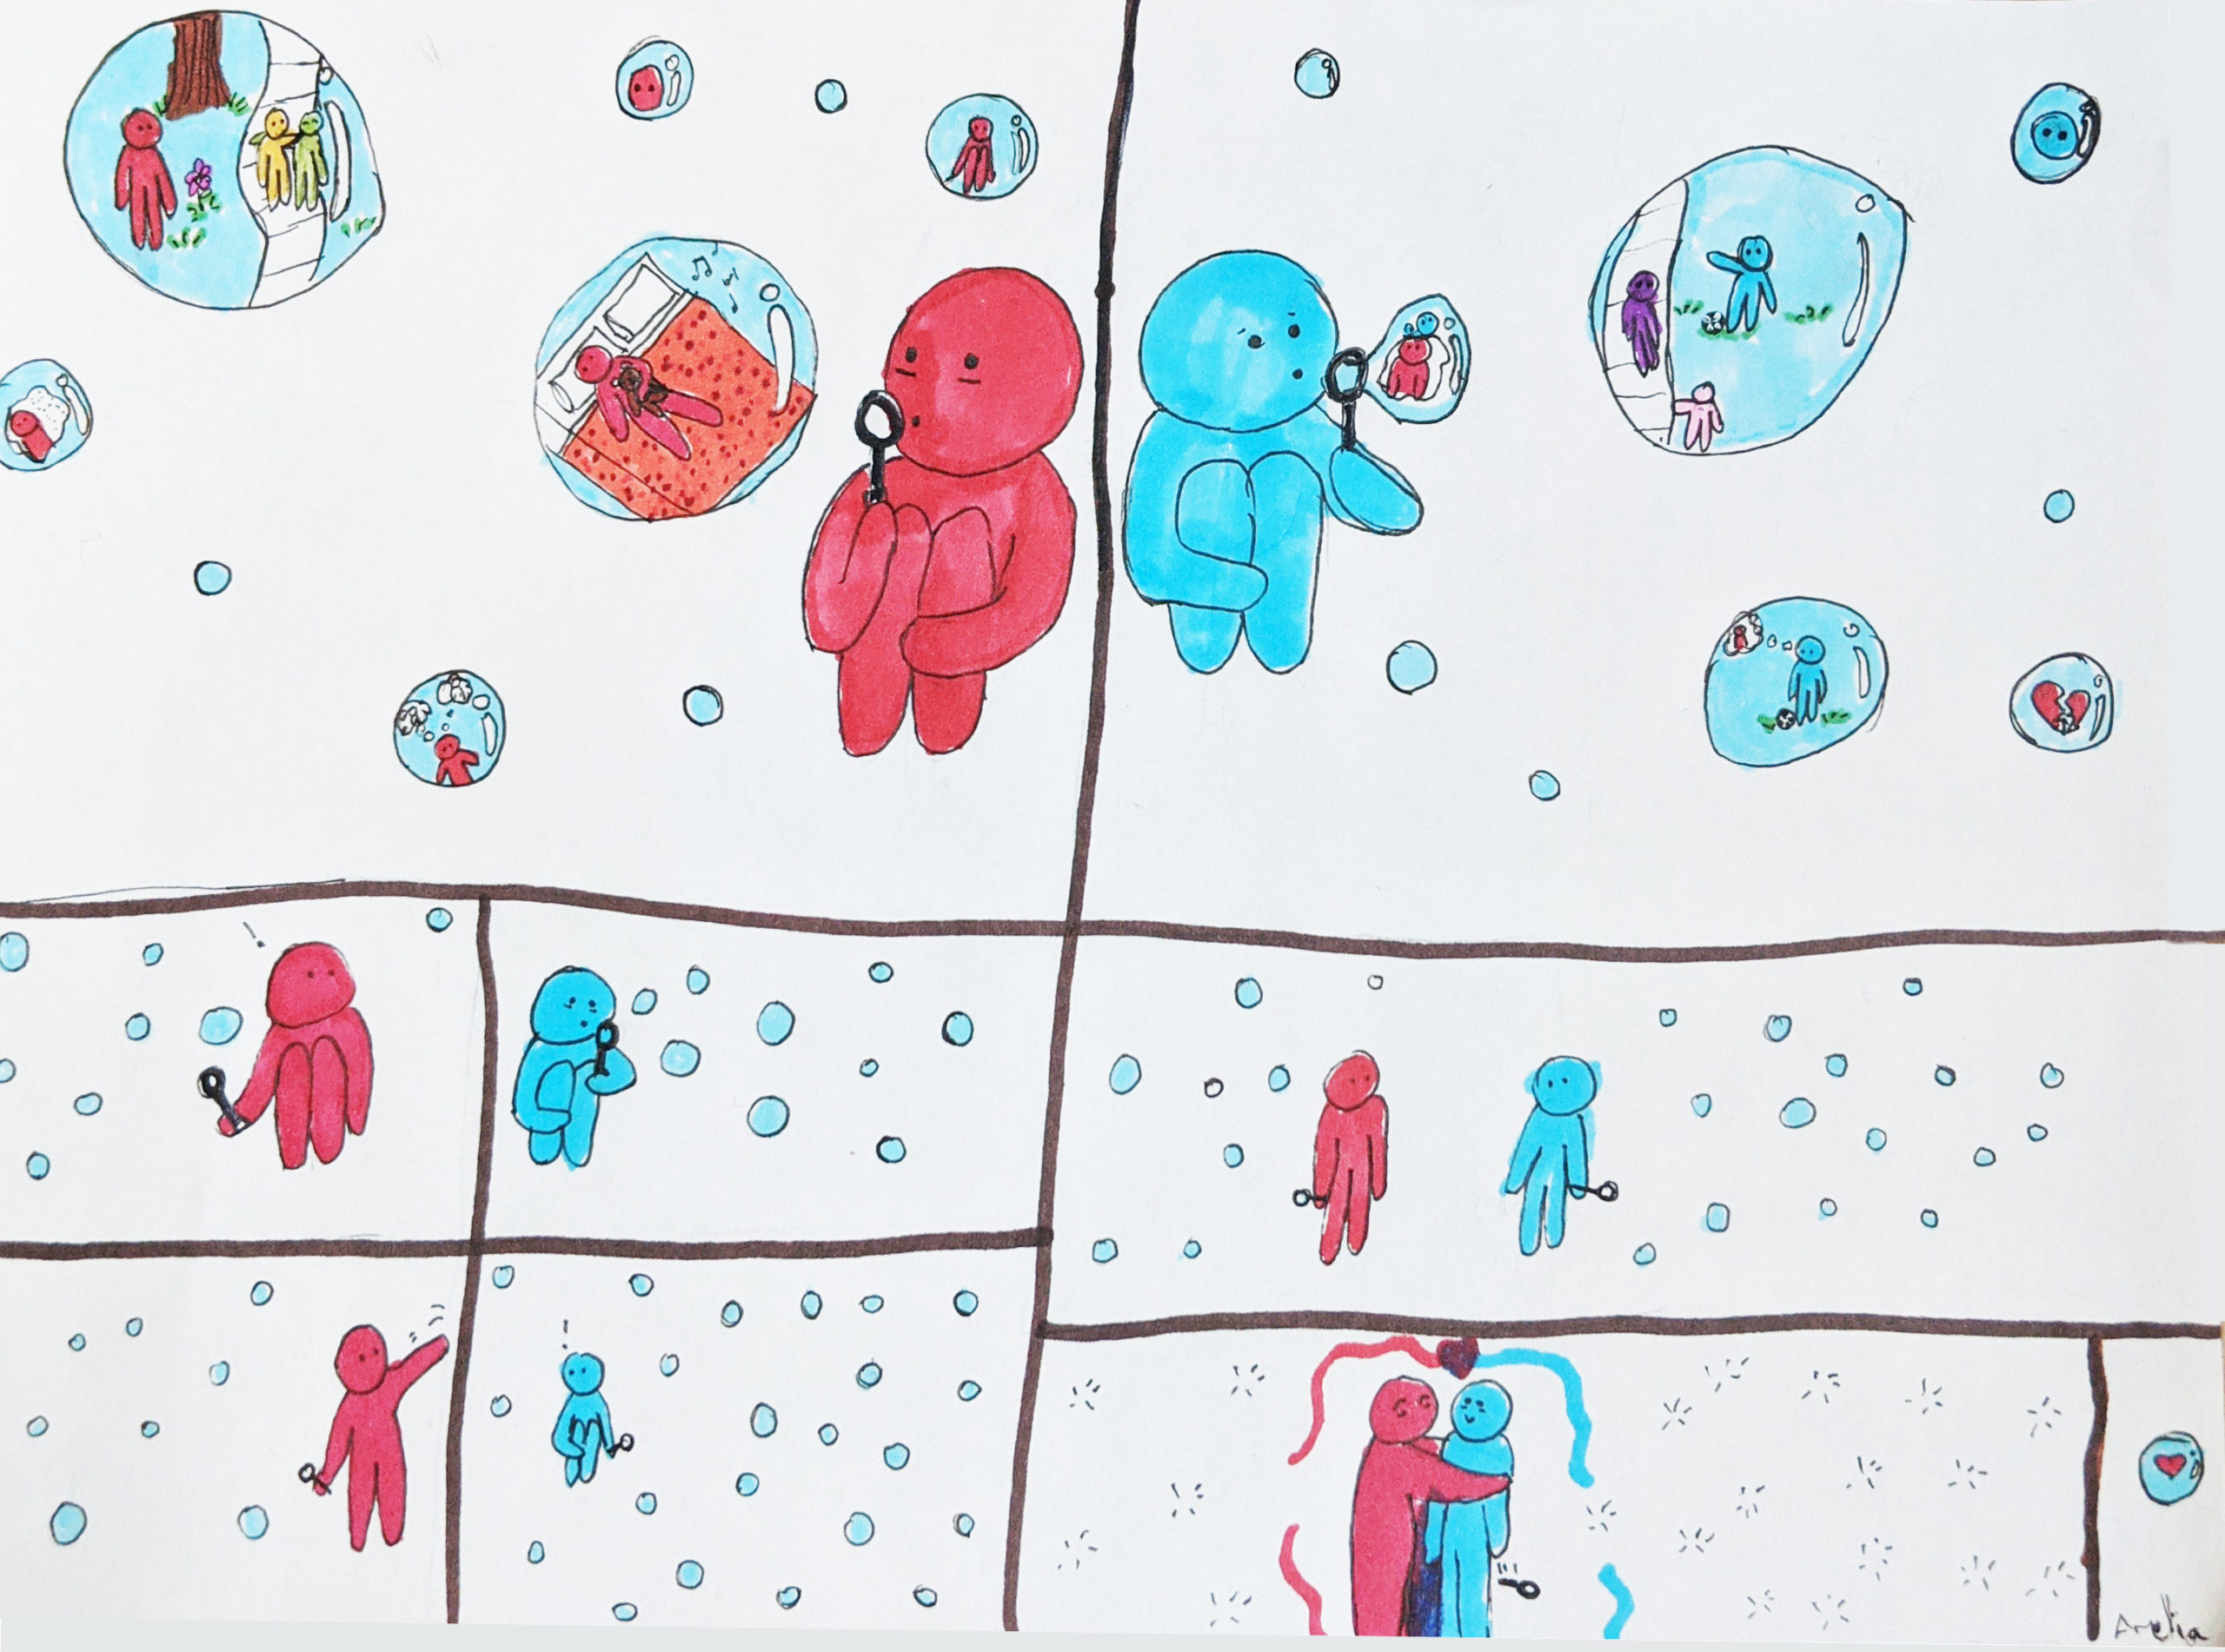 Drawing done in marker shows one person (drawn in red) blowing a bubble to another person (drawn in blue). The two blow bubbles to each other. They are communicate through bubbles in the story board and embrace in a hug in the final scene.